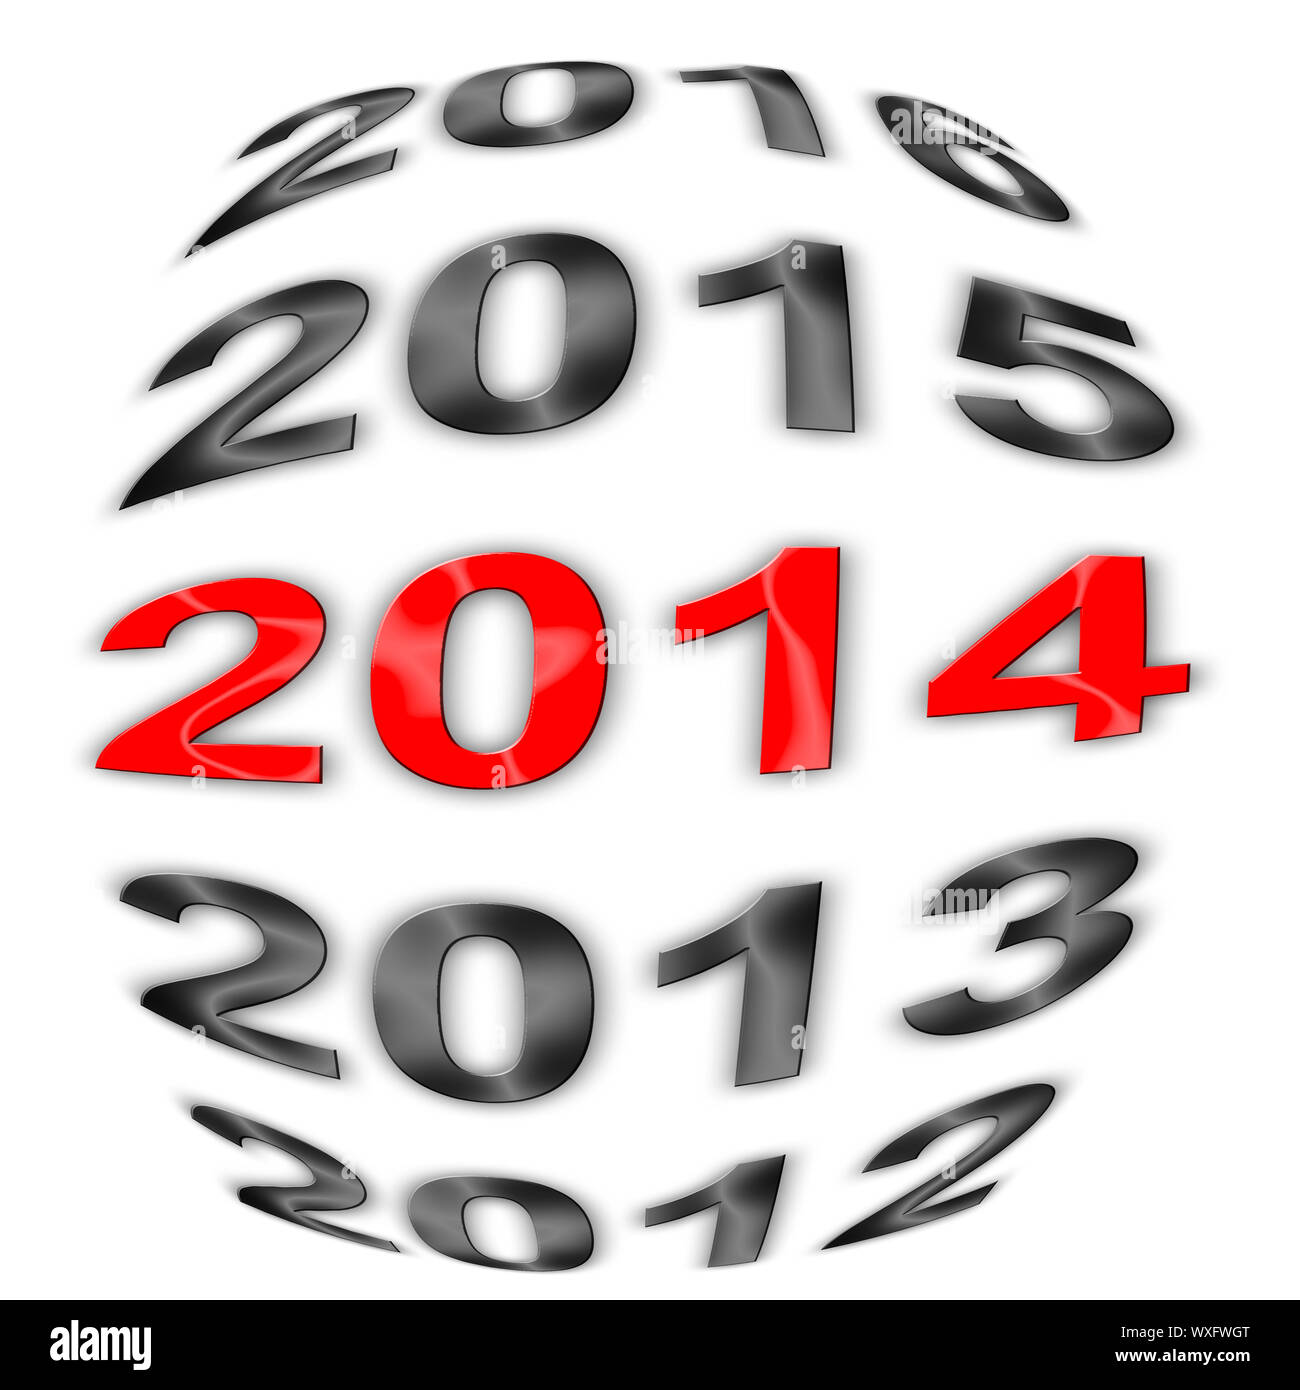 Illustration of series of years with highlighted 2014 Stock Photo